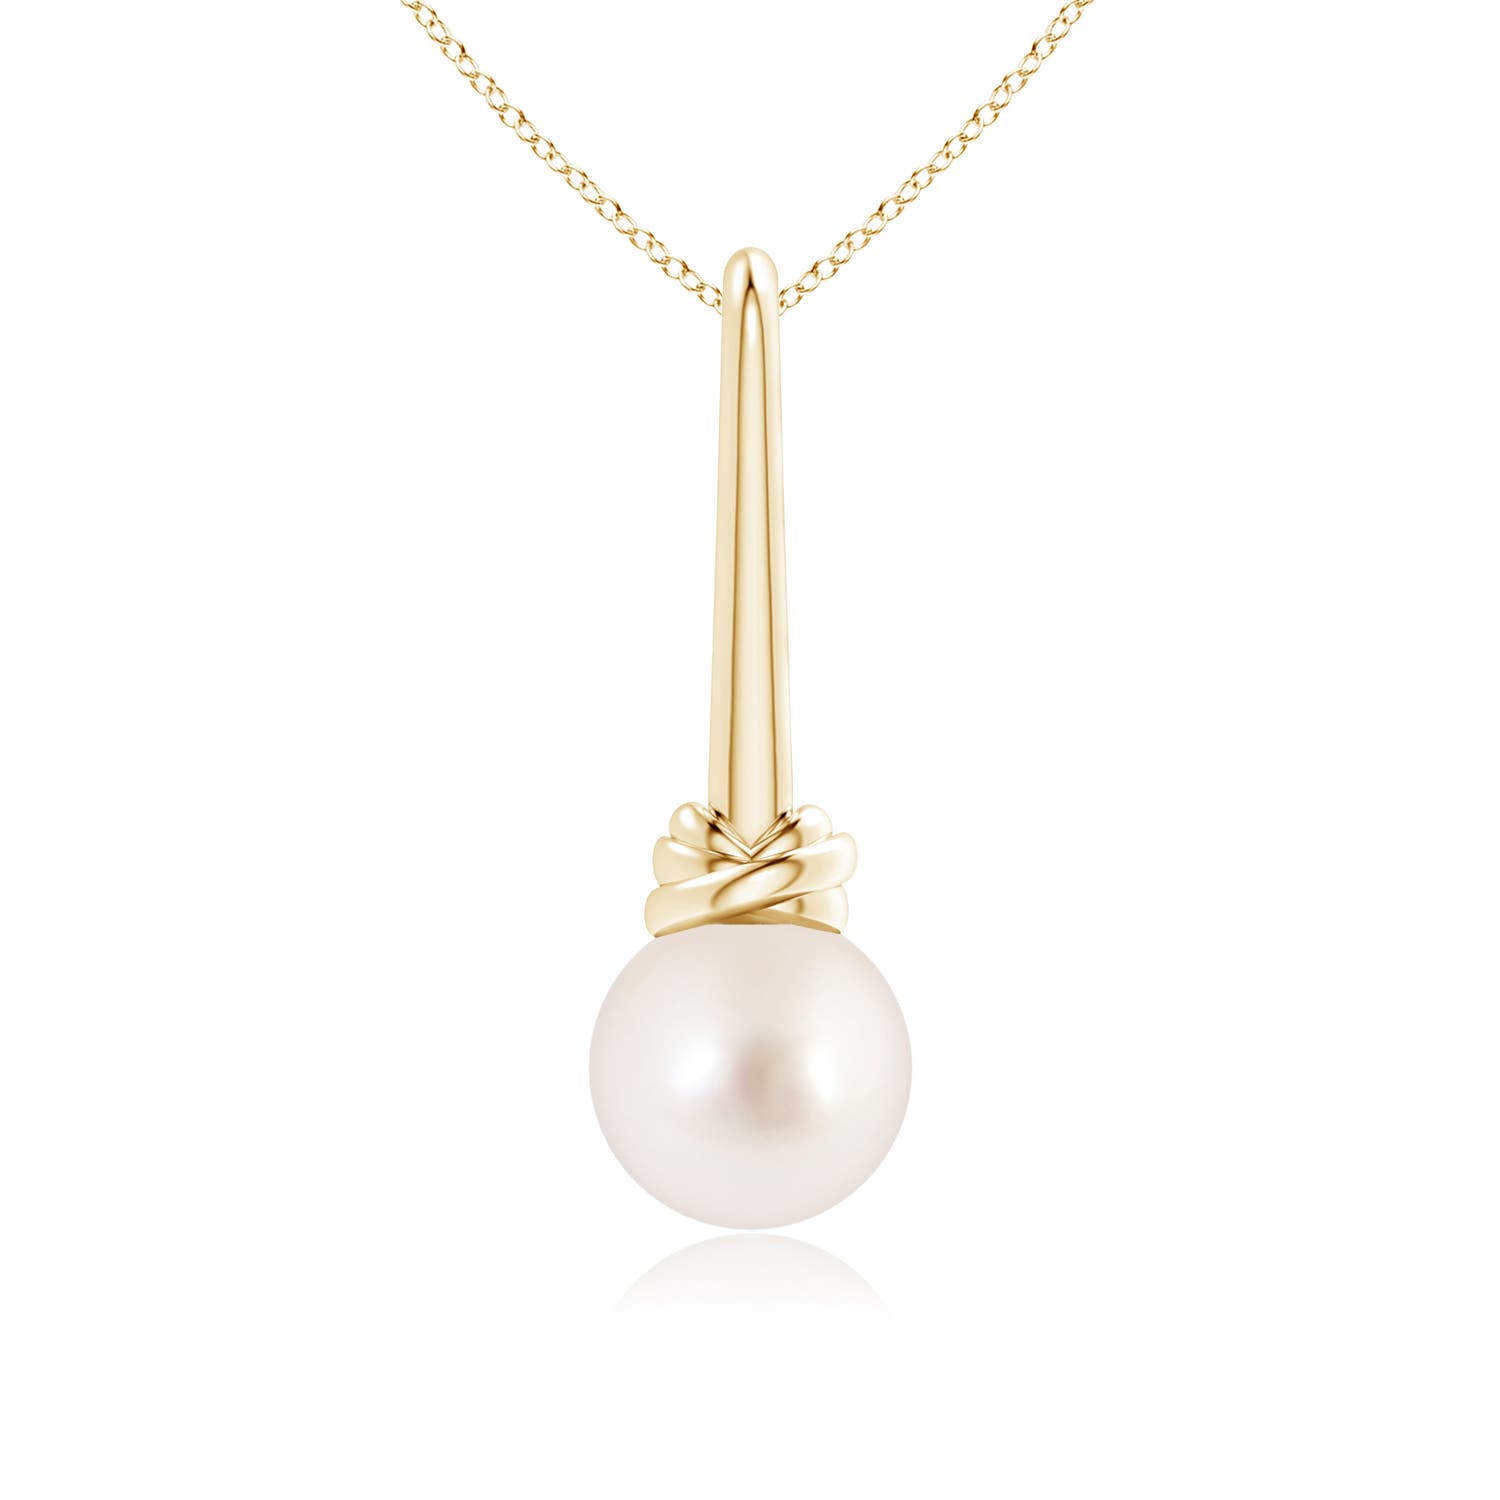 AAAA - South Sea Cultured Pearl / 5.25 CT / 14 KT Yellow Gold